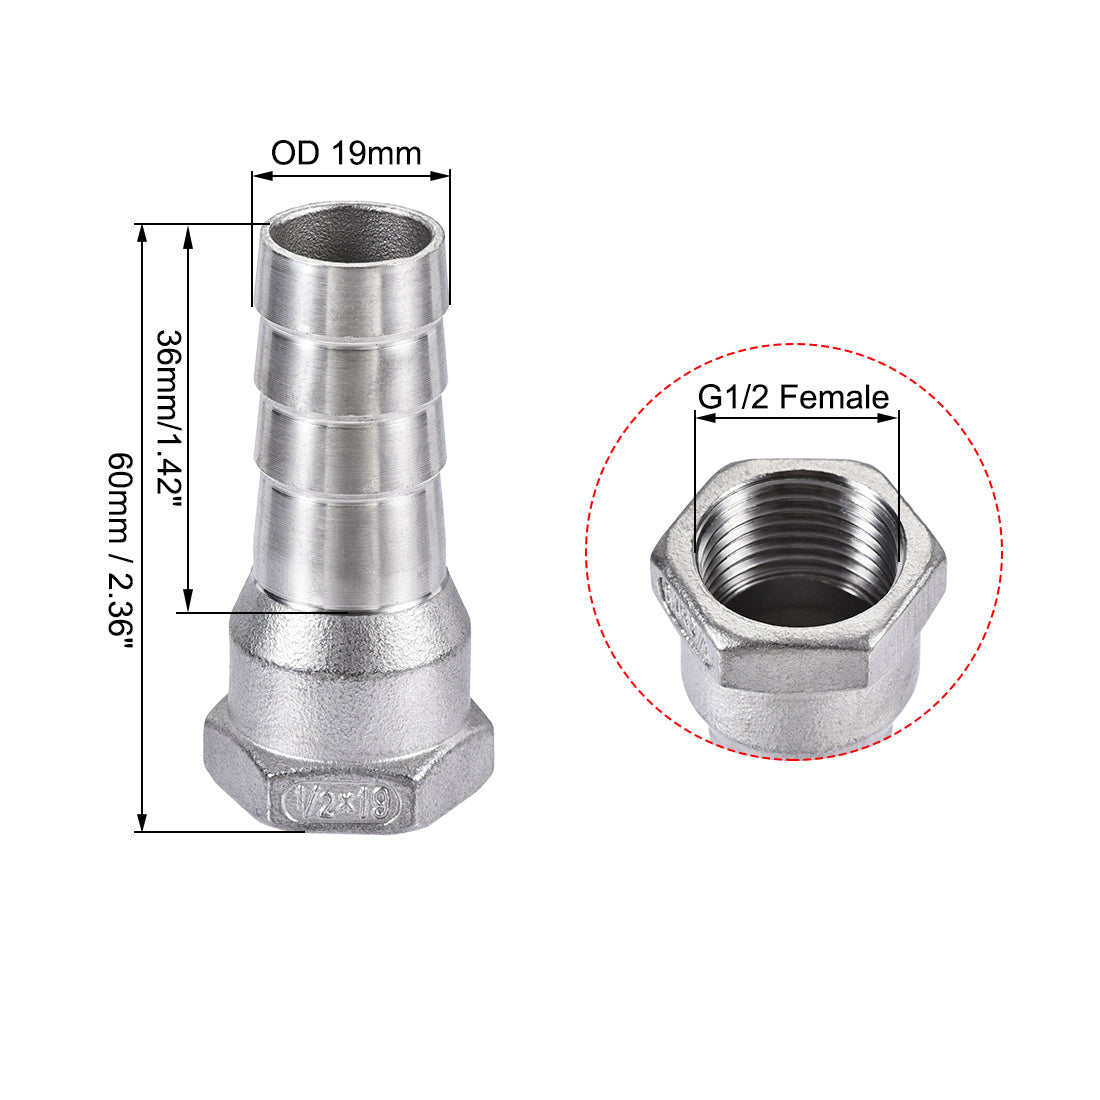 uxcell Uxcell 304 Stainless Steel Hose Barb Fitting Coupler 19mm Barb G1/2 Female Thread 2Pcs